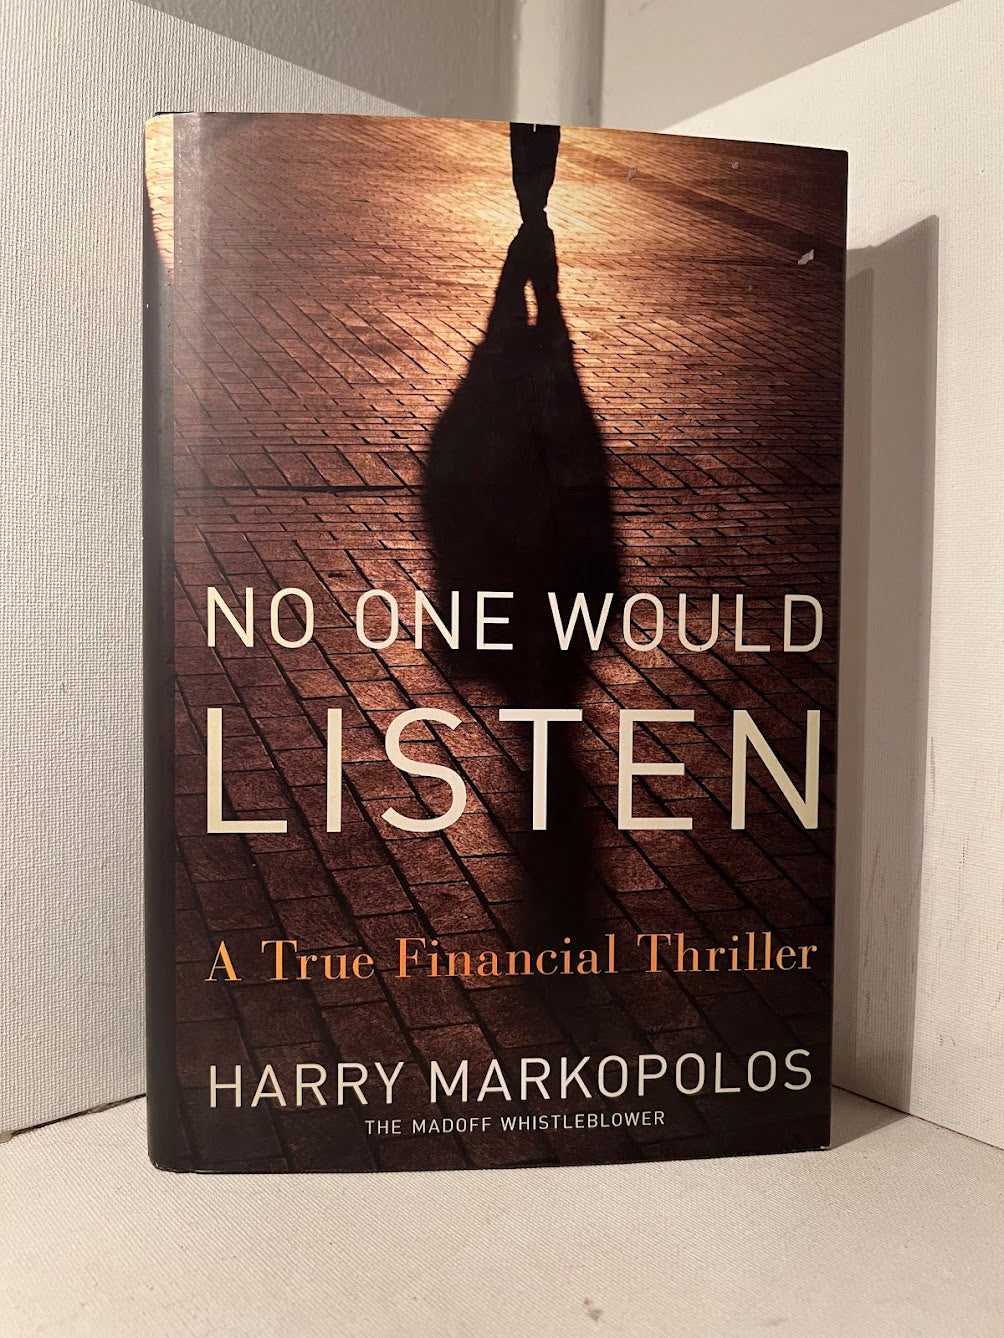 No One Would Listen - A True Financial Thriller by Harry Markopolos